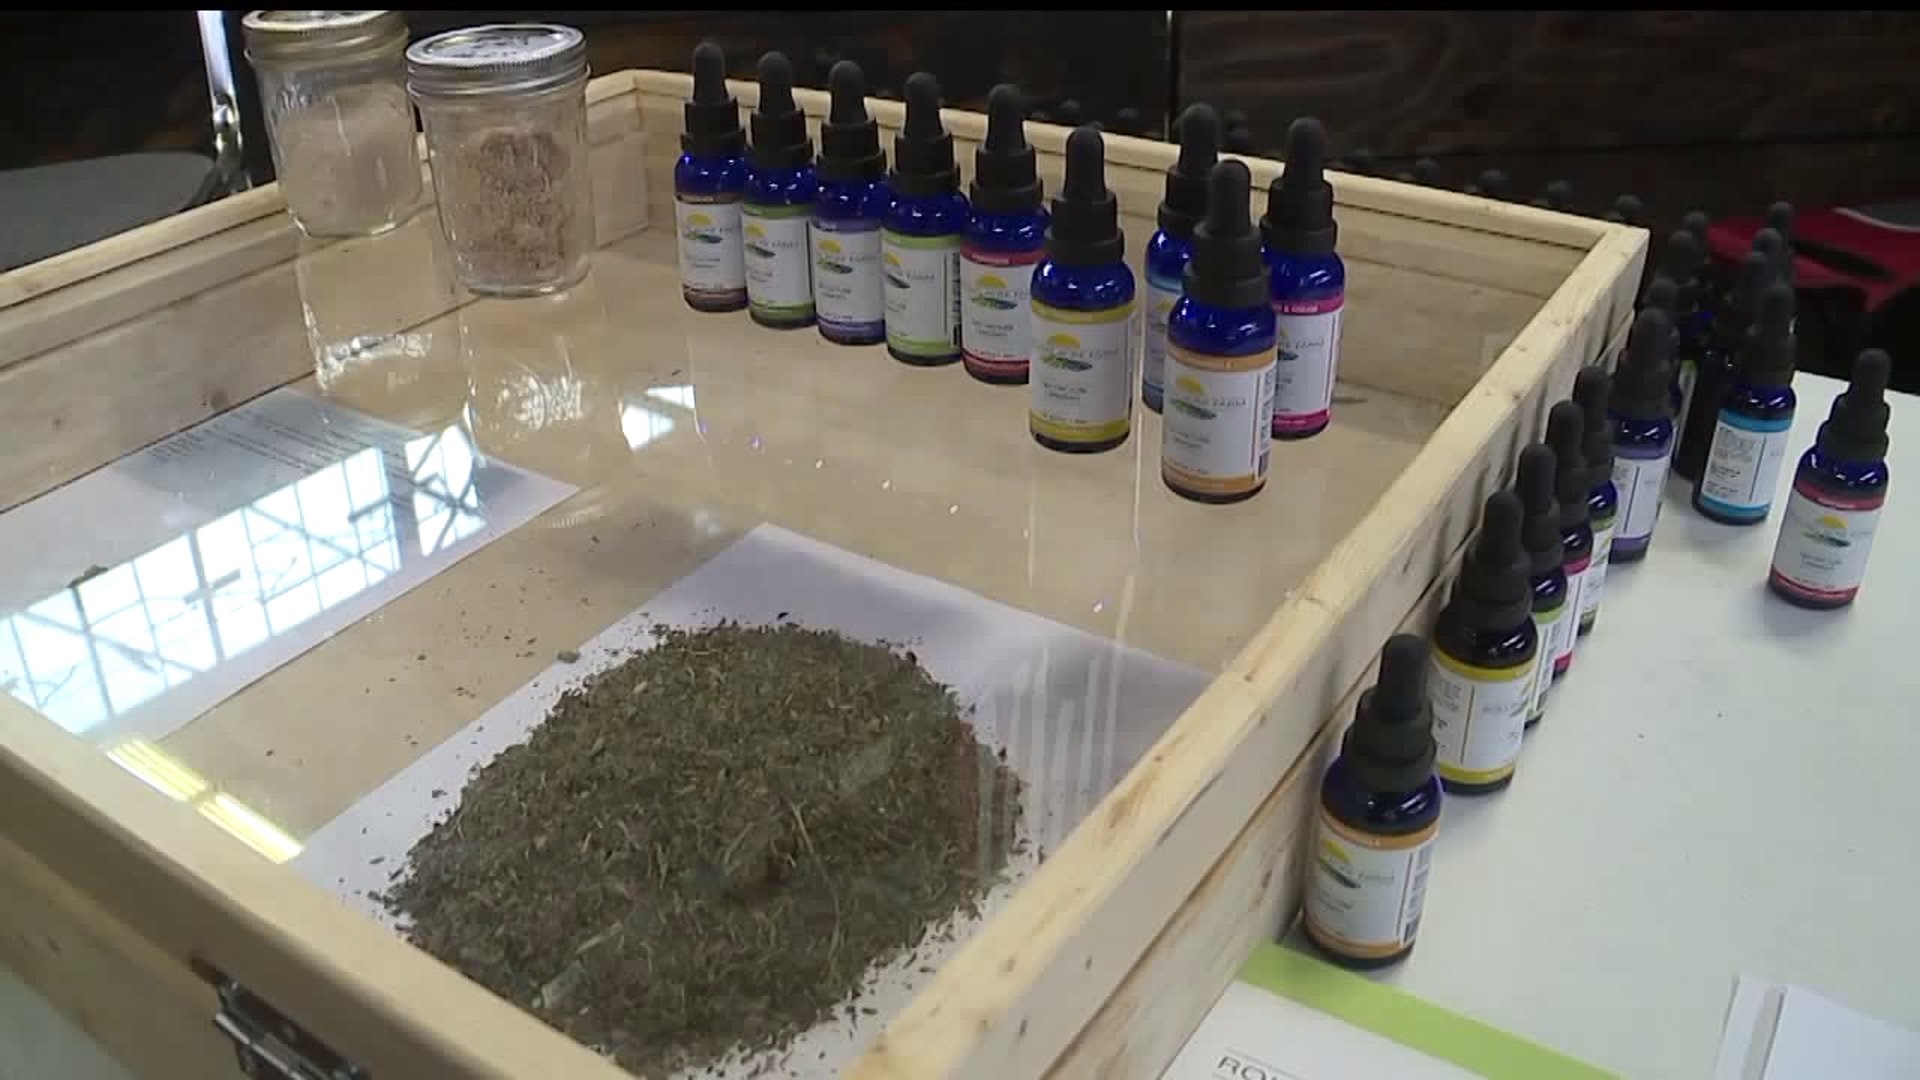 Hemp products at the PA Farm show